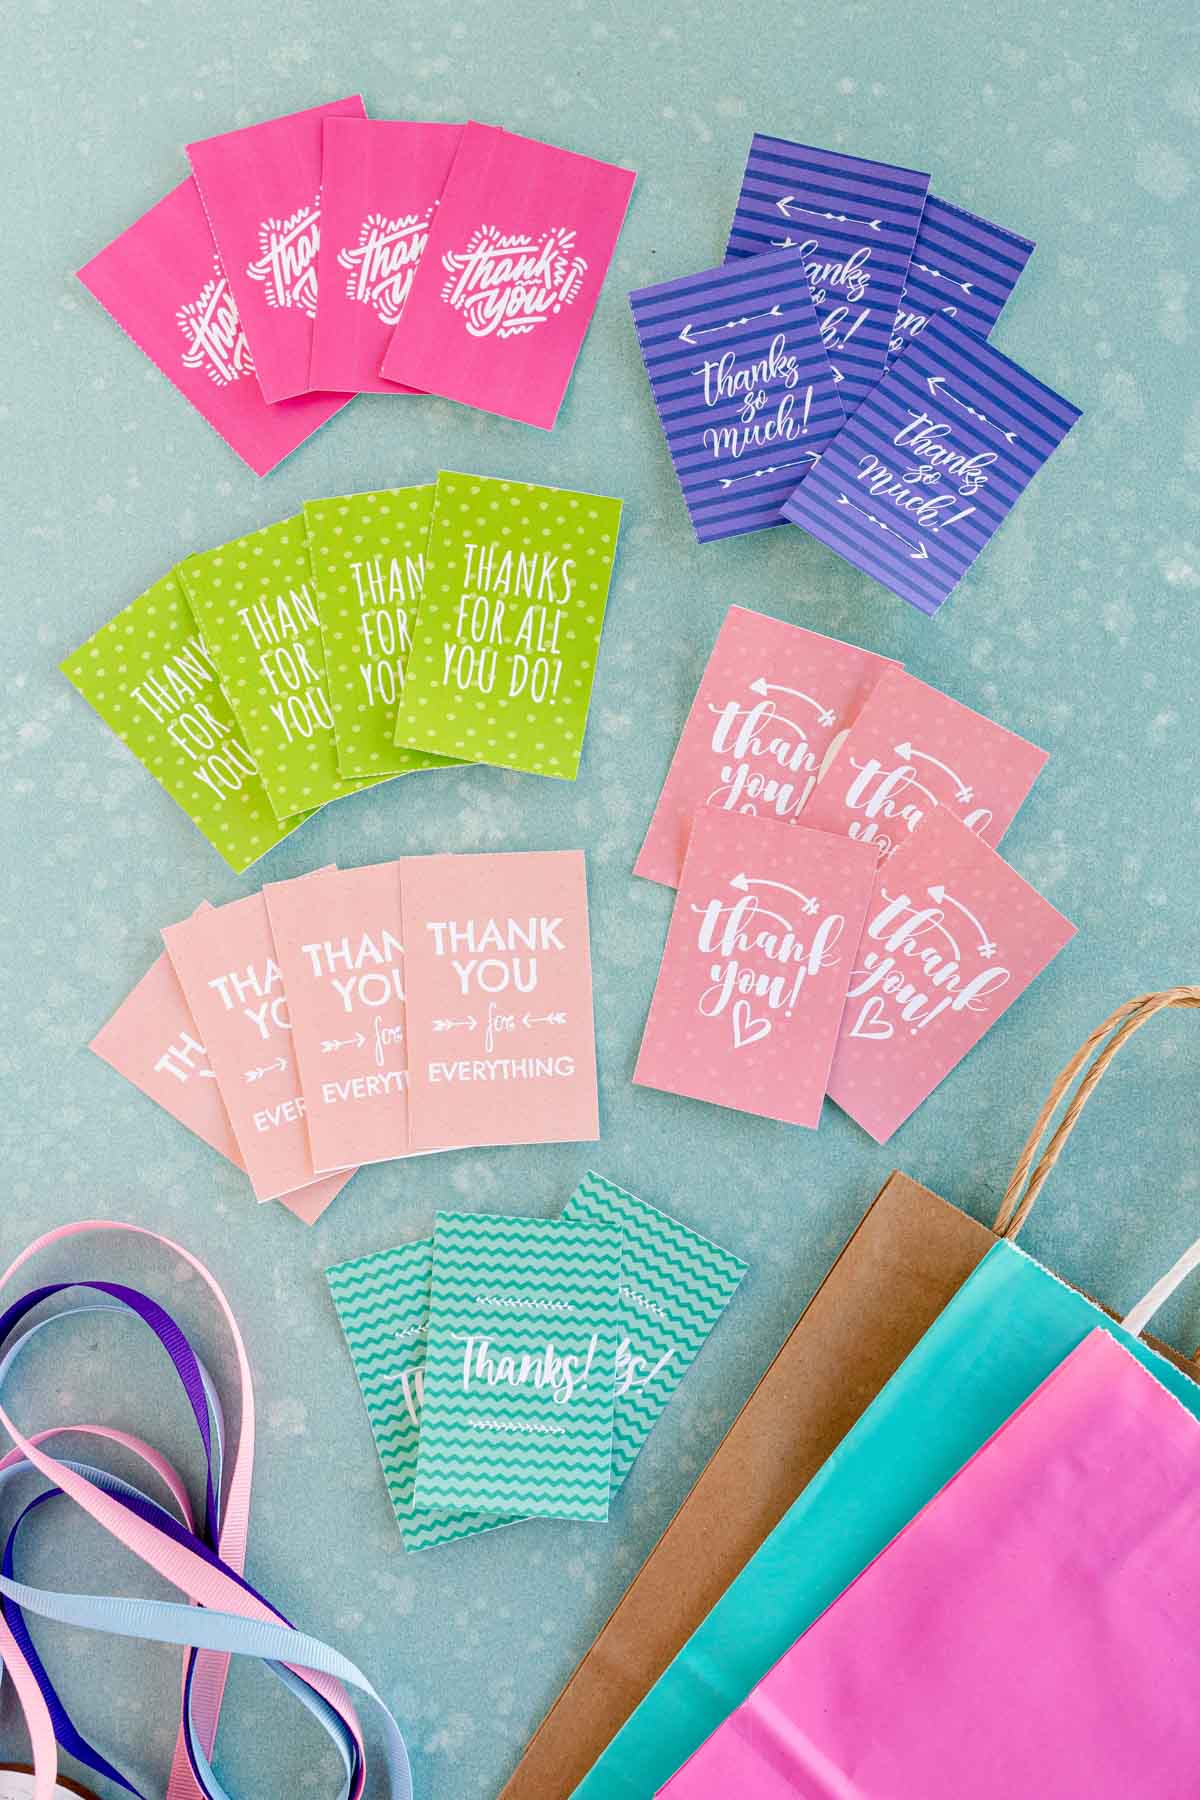 Printed and cut thank you tags